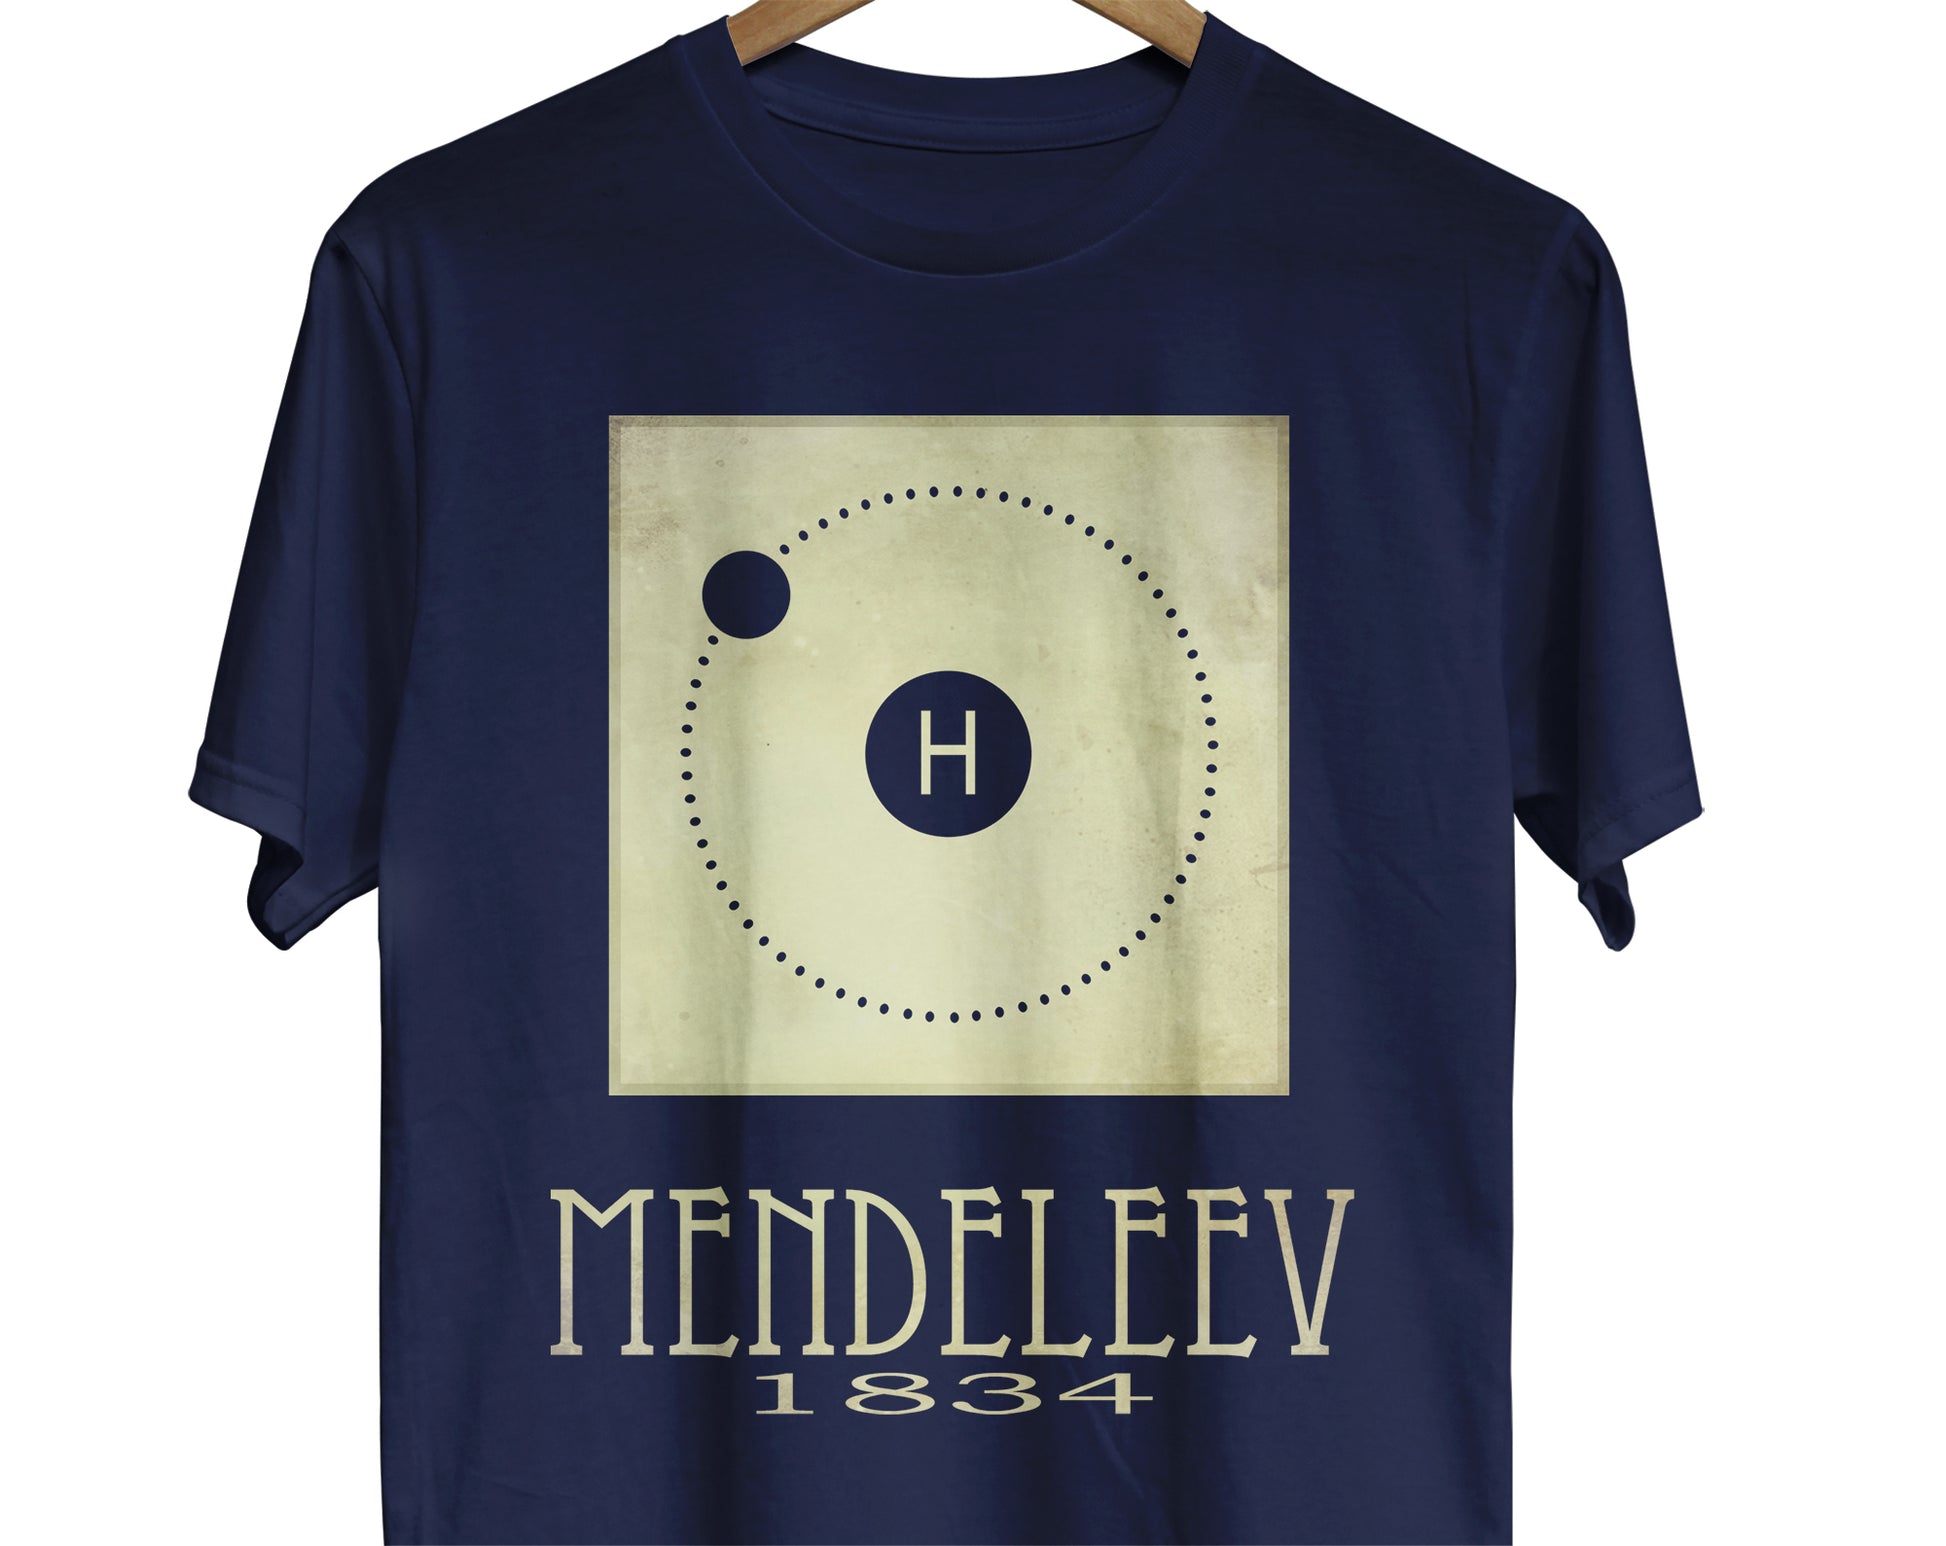 Dmitri Mendeleev chemistry t-shirt with period table of elements design